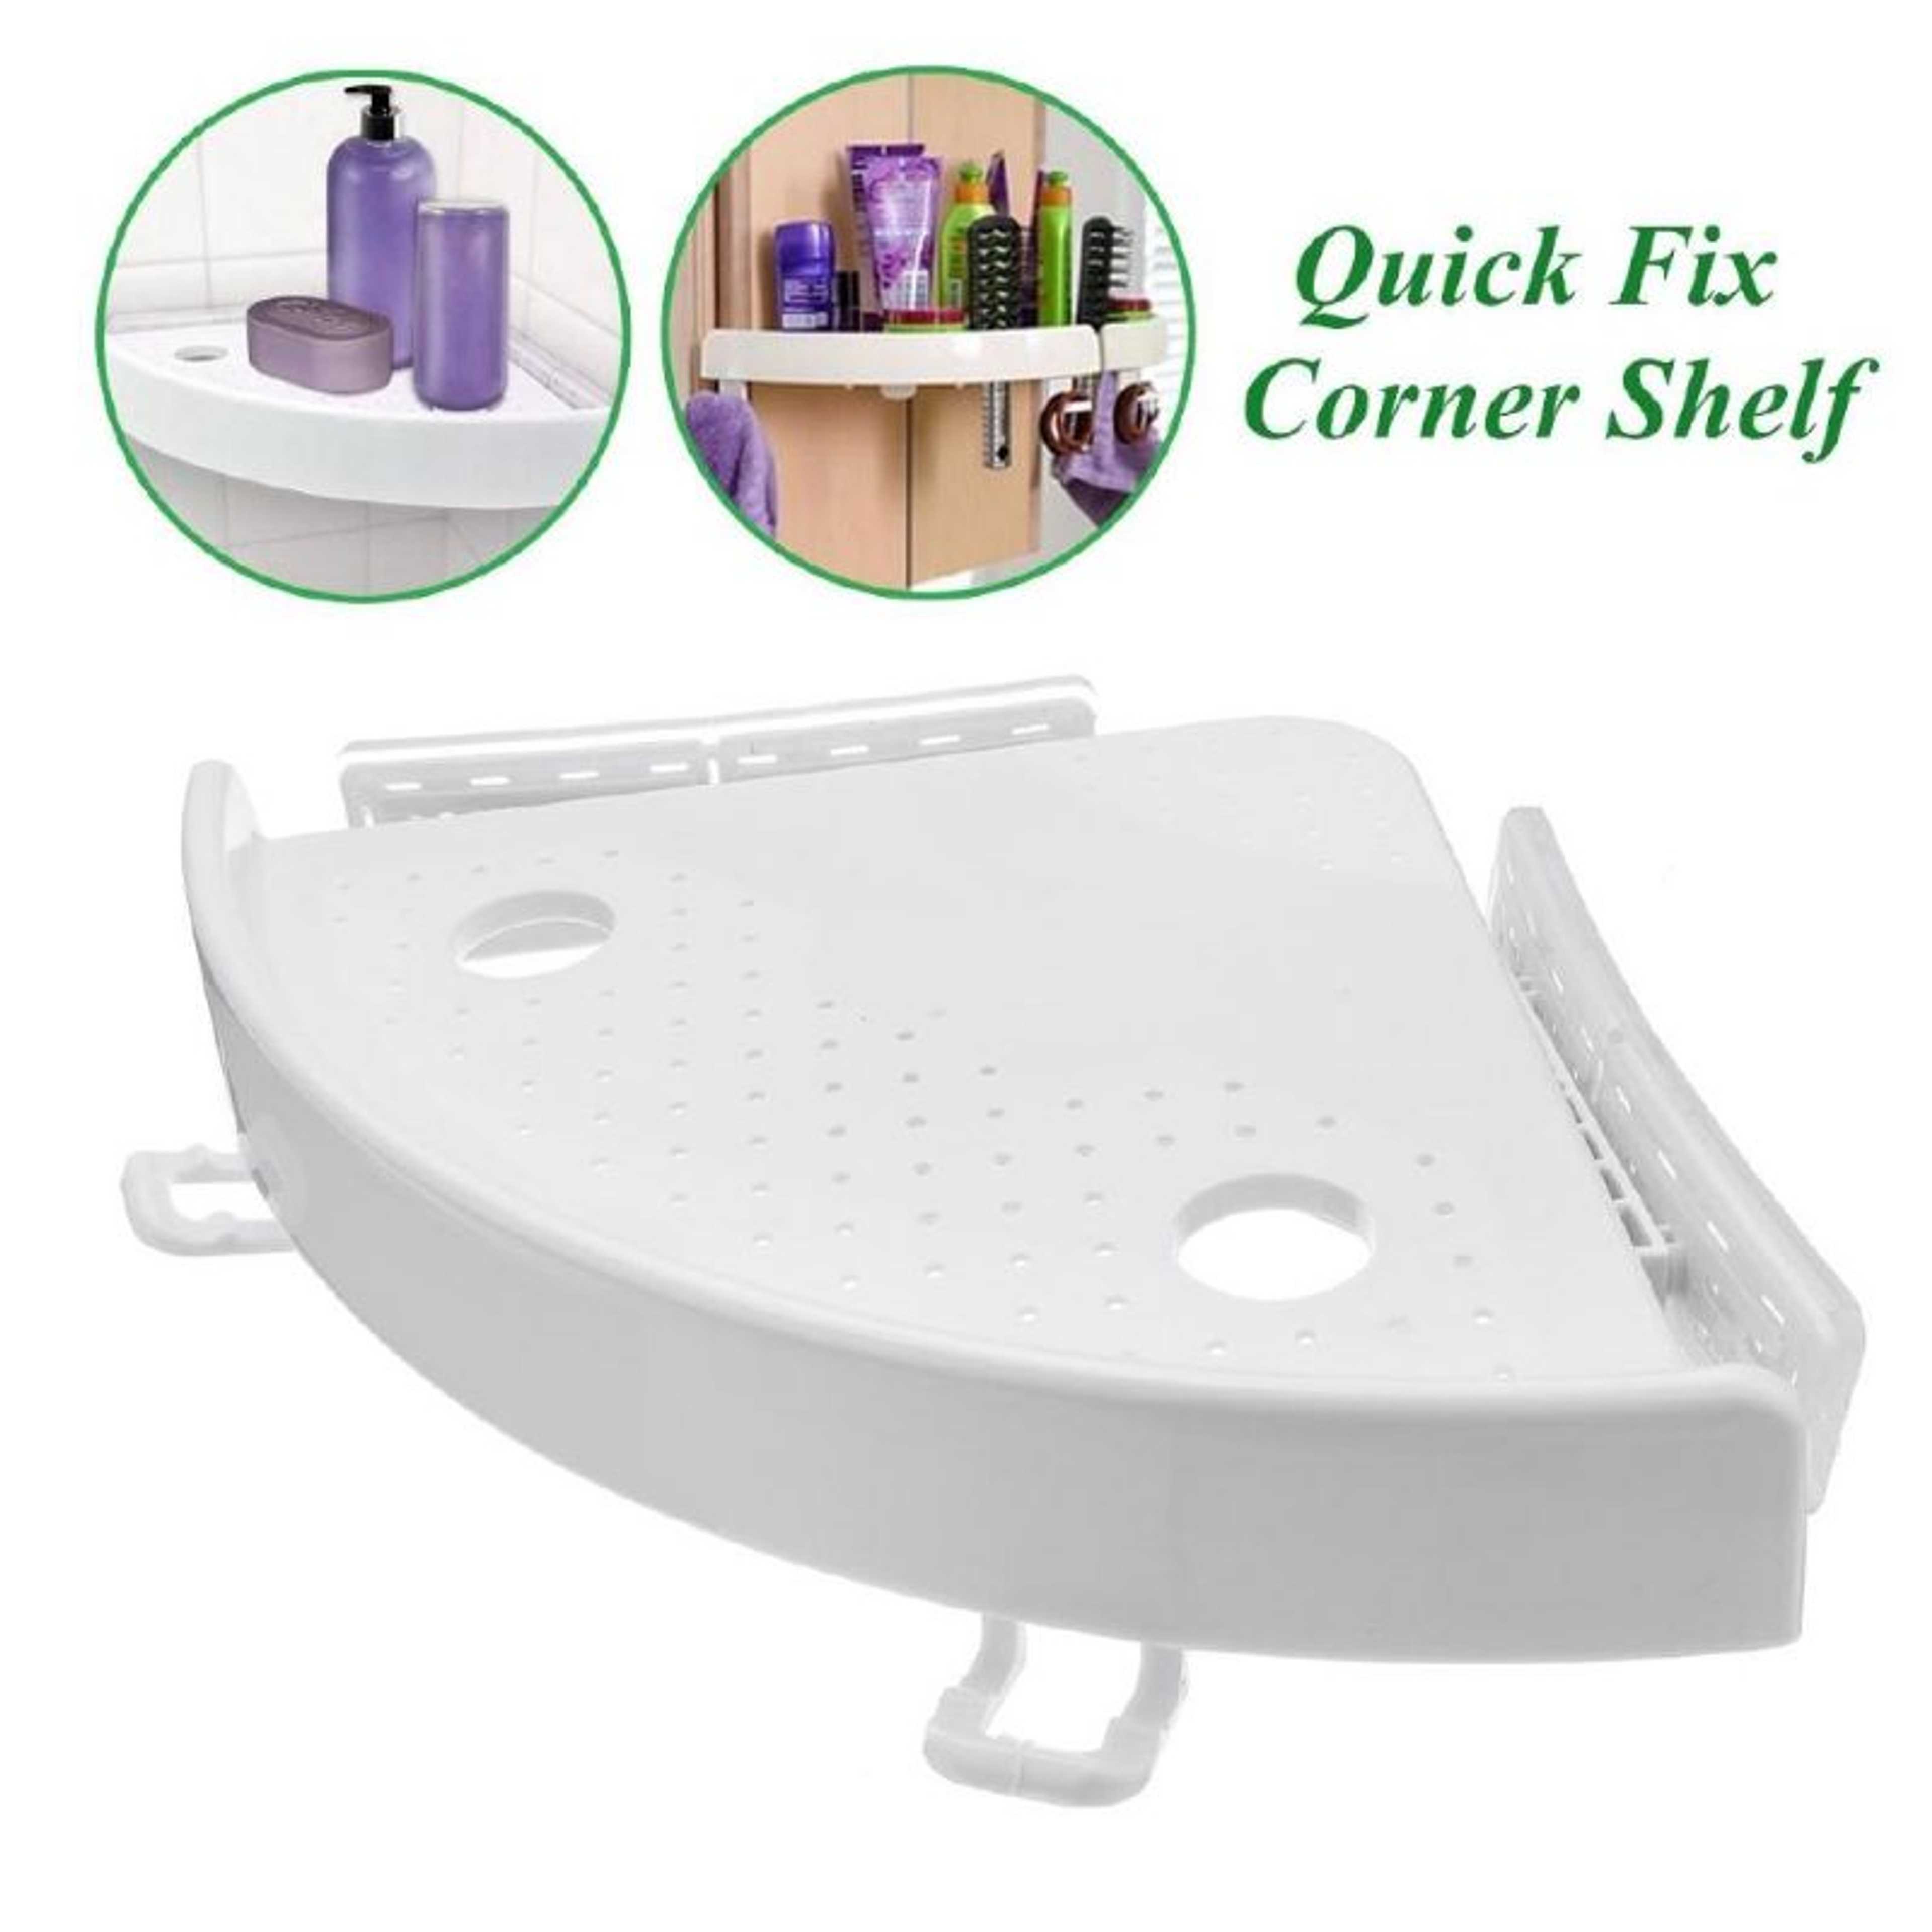 Multipurpose Quick Fix Corner Triangle Shelf SnapUp Stable Easy Wall for Bathroom Kitchen Room Space Saver Rack